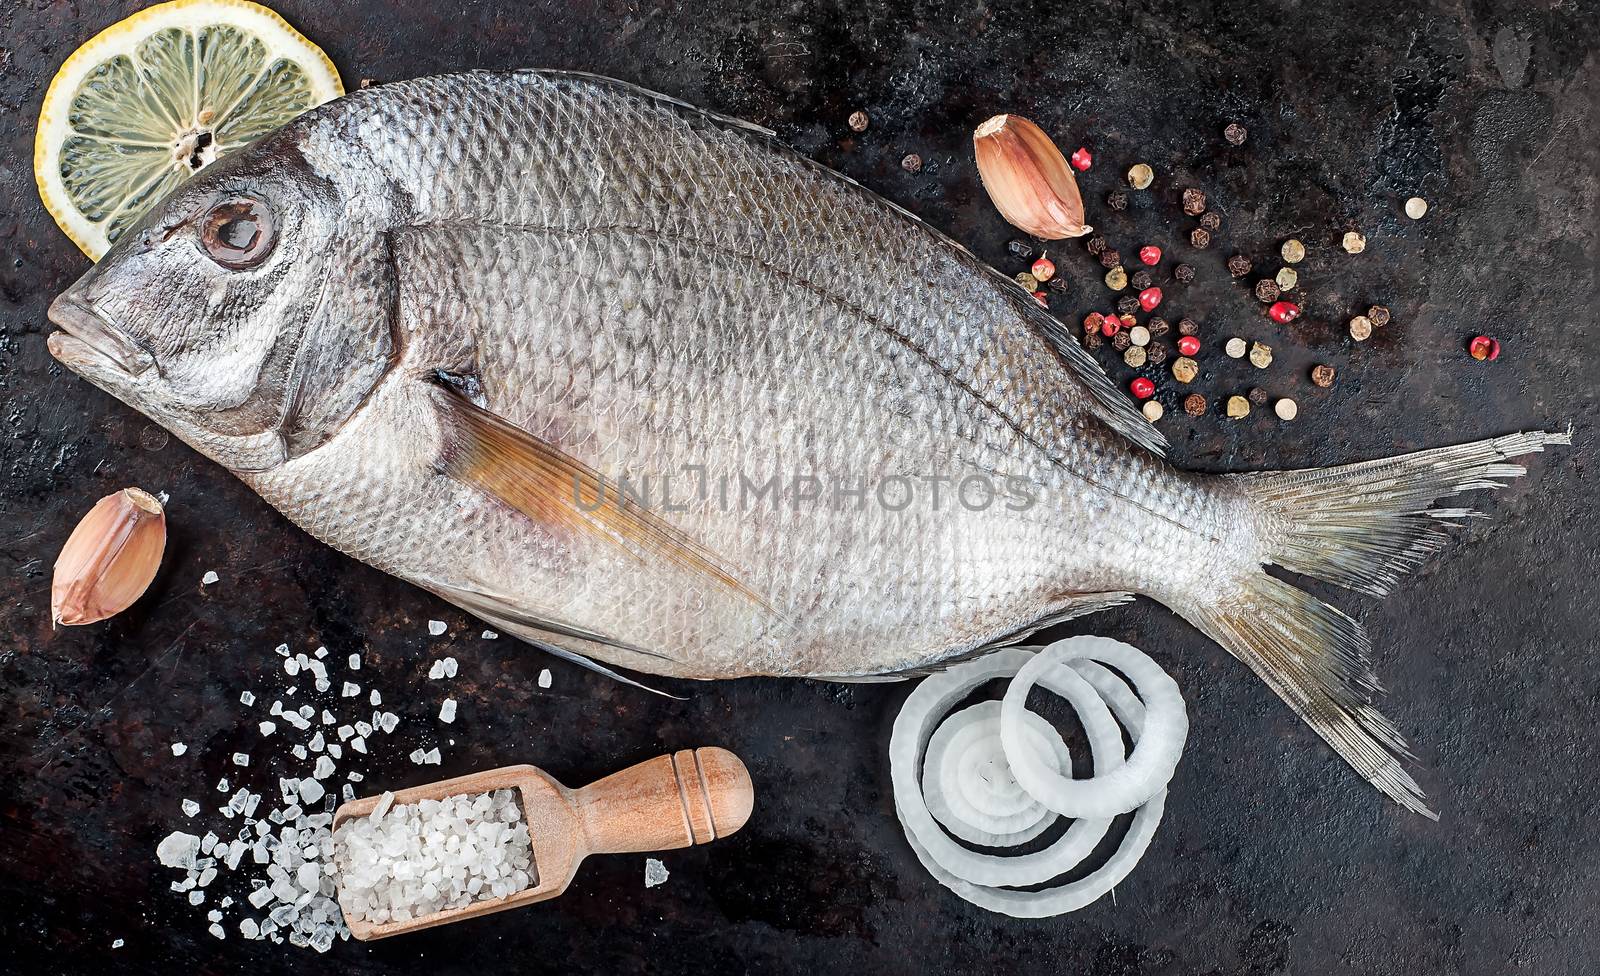 Dorado fish on pan with spices by Cipariss